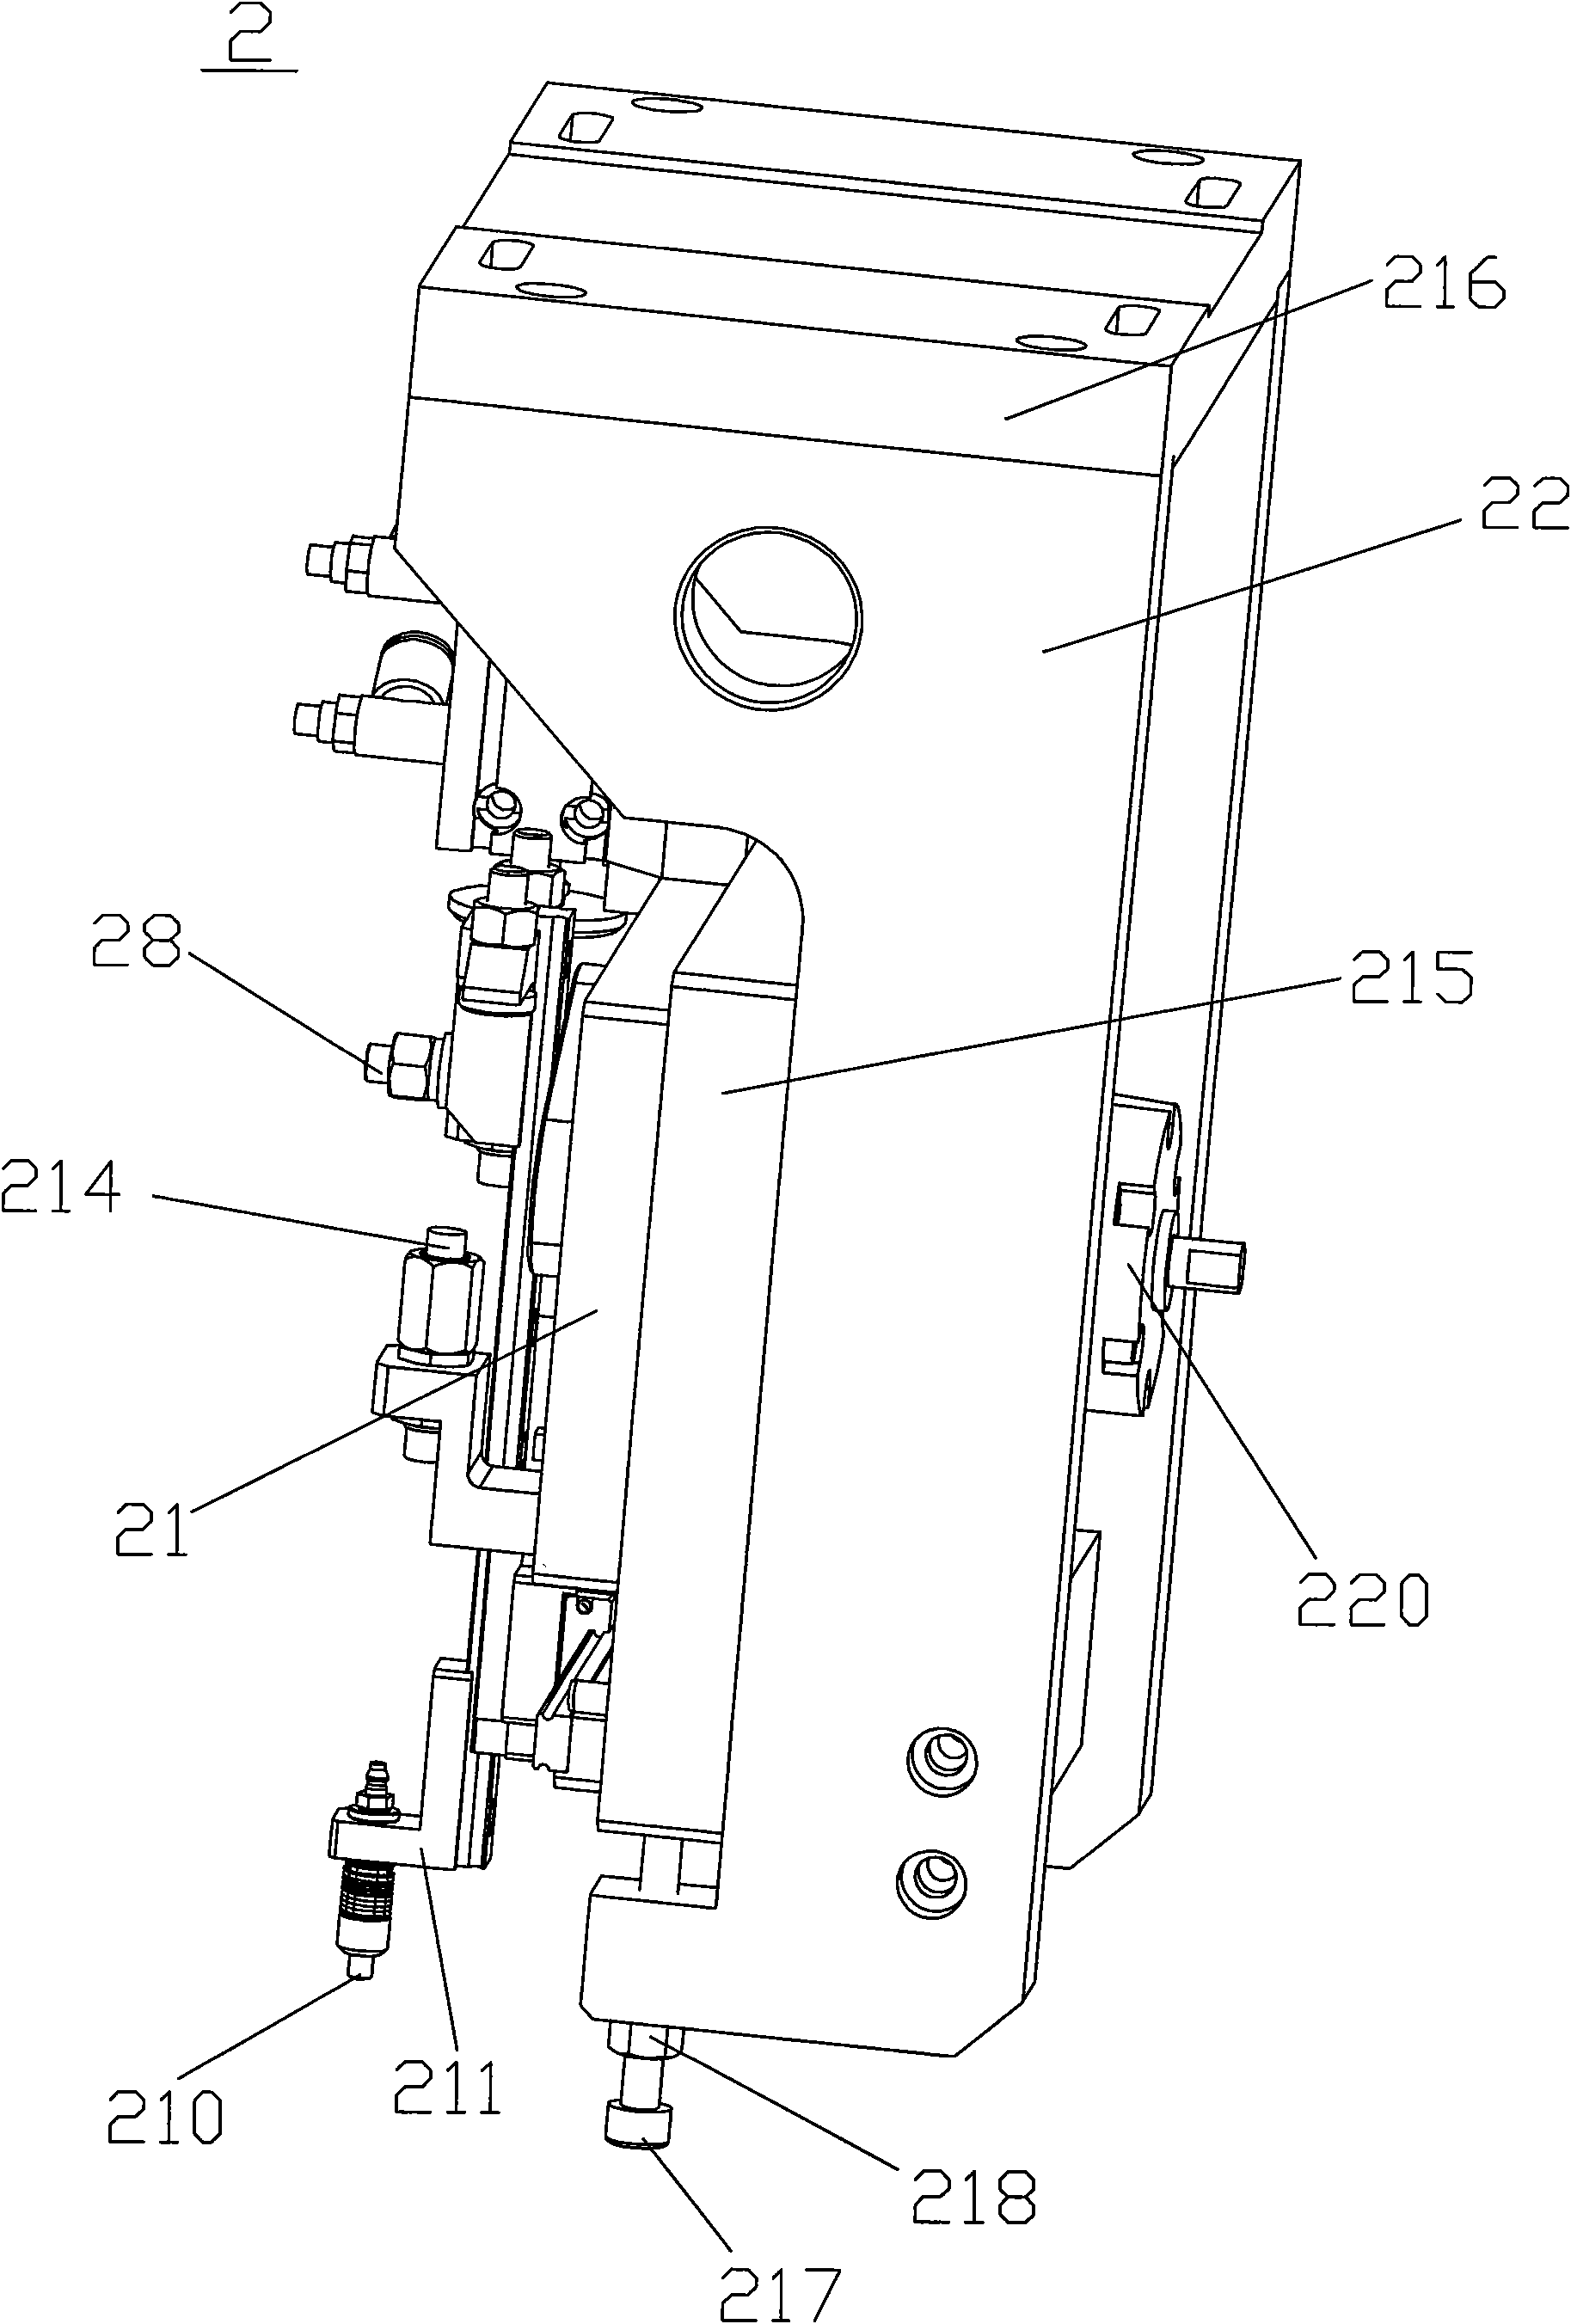 Tray charging method and vibratory tray charger